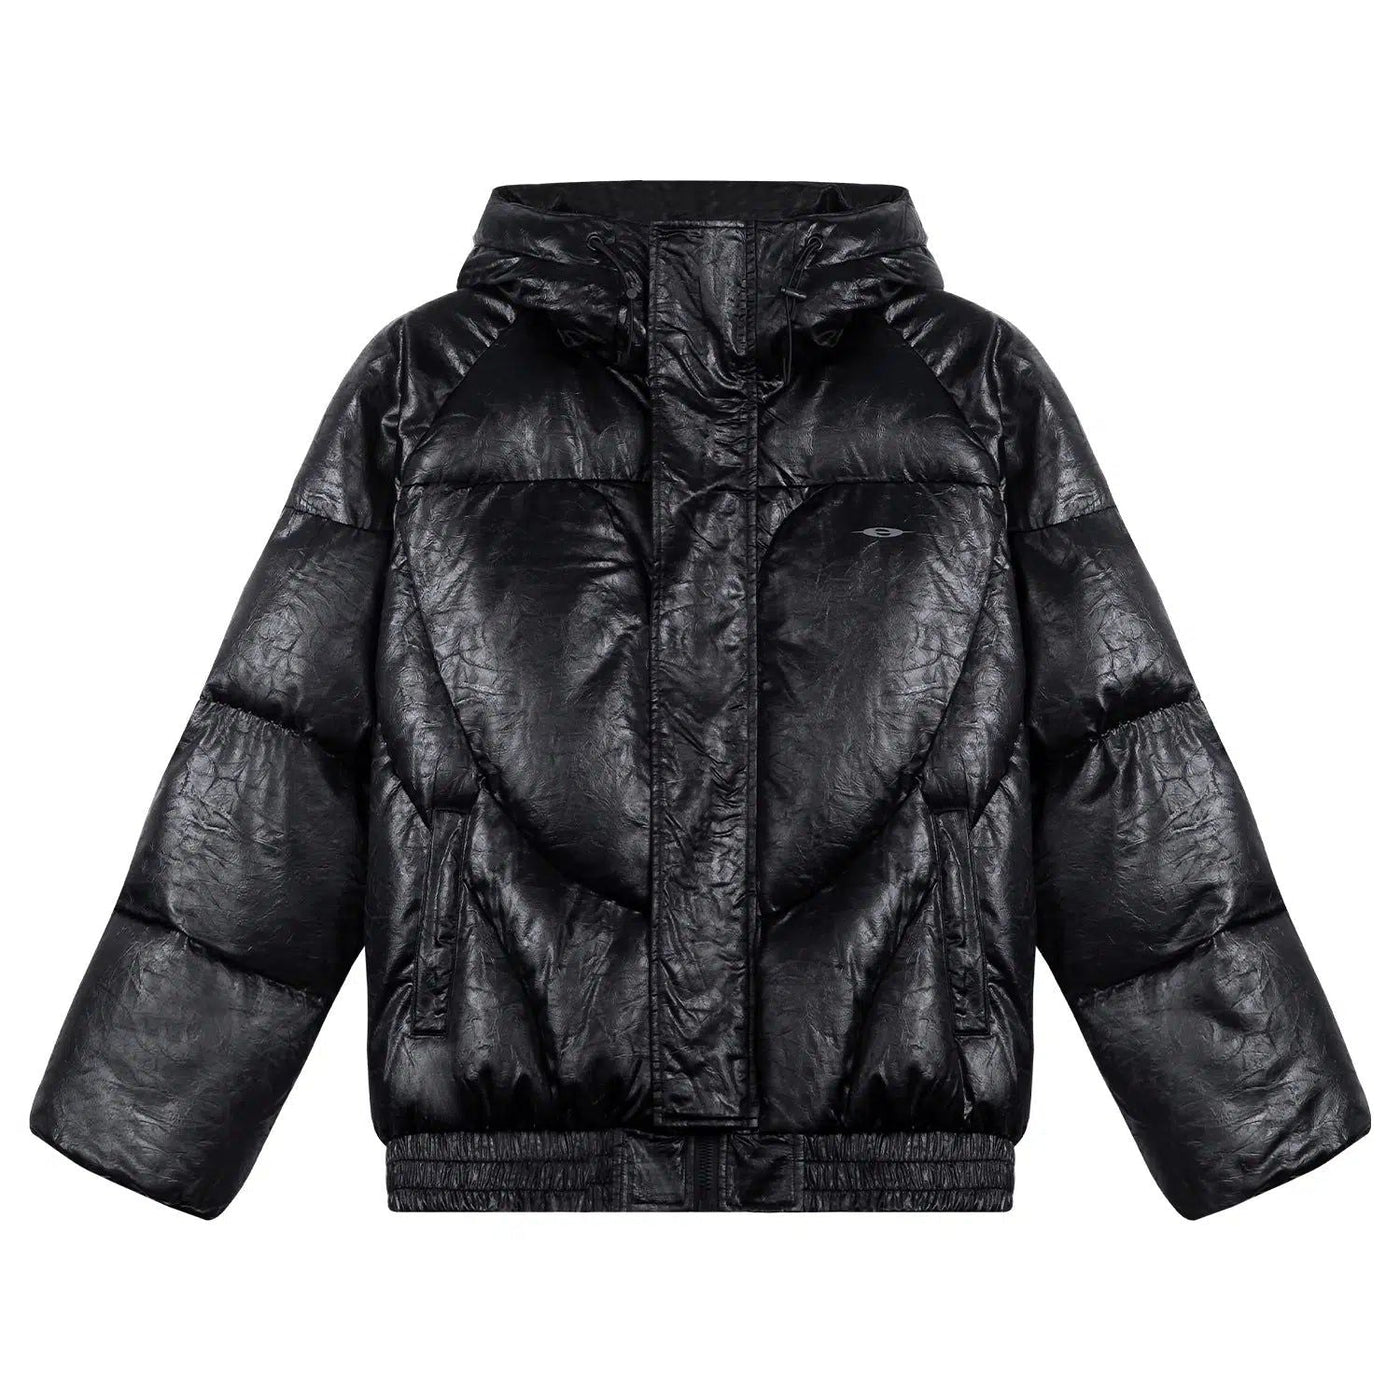 Textured PU Leather Puffer Jacket Korean Street Fashion Jacket By Terra Incognita Shop Online at OH Vault